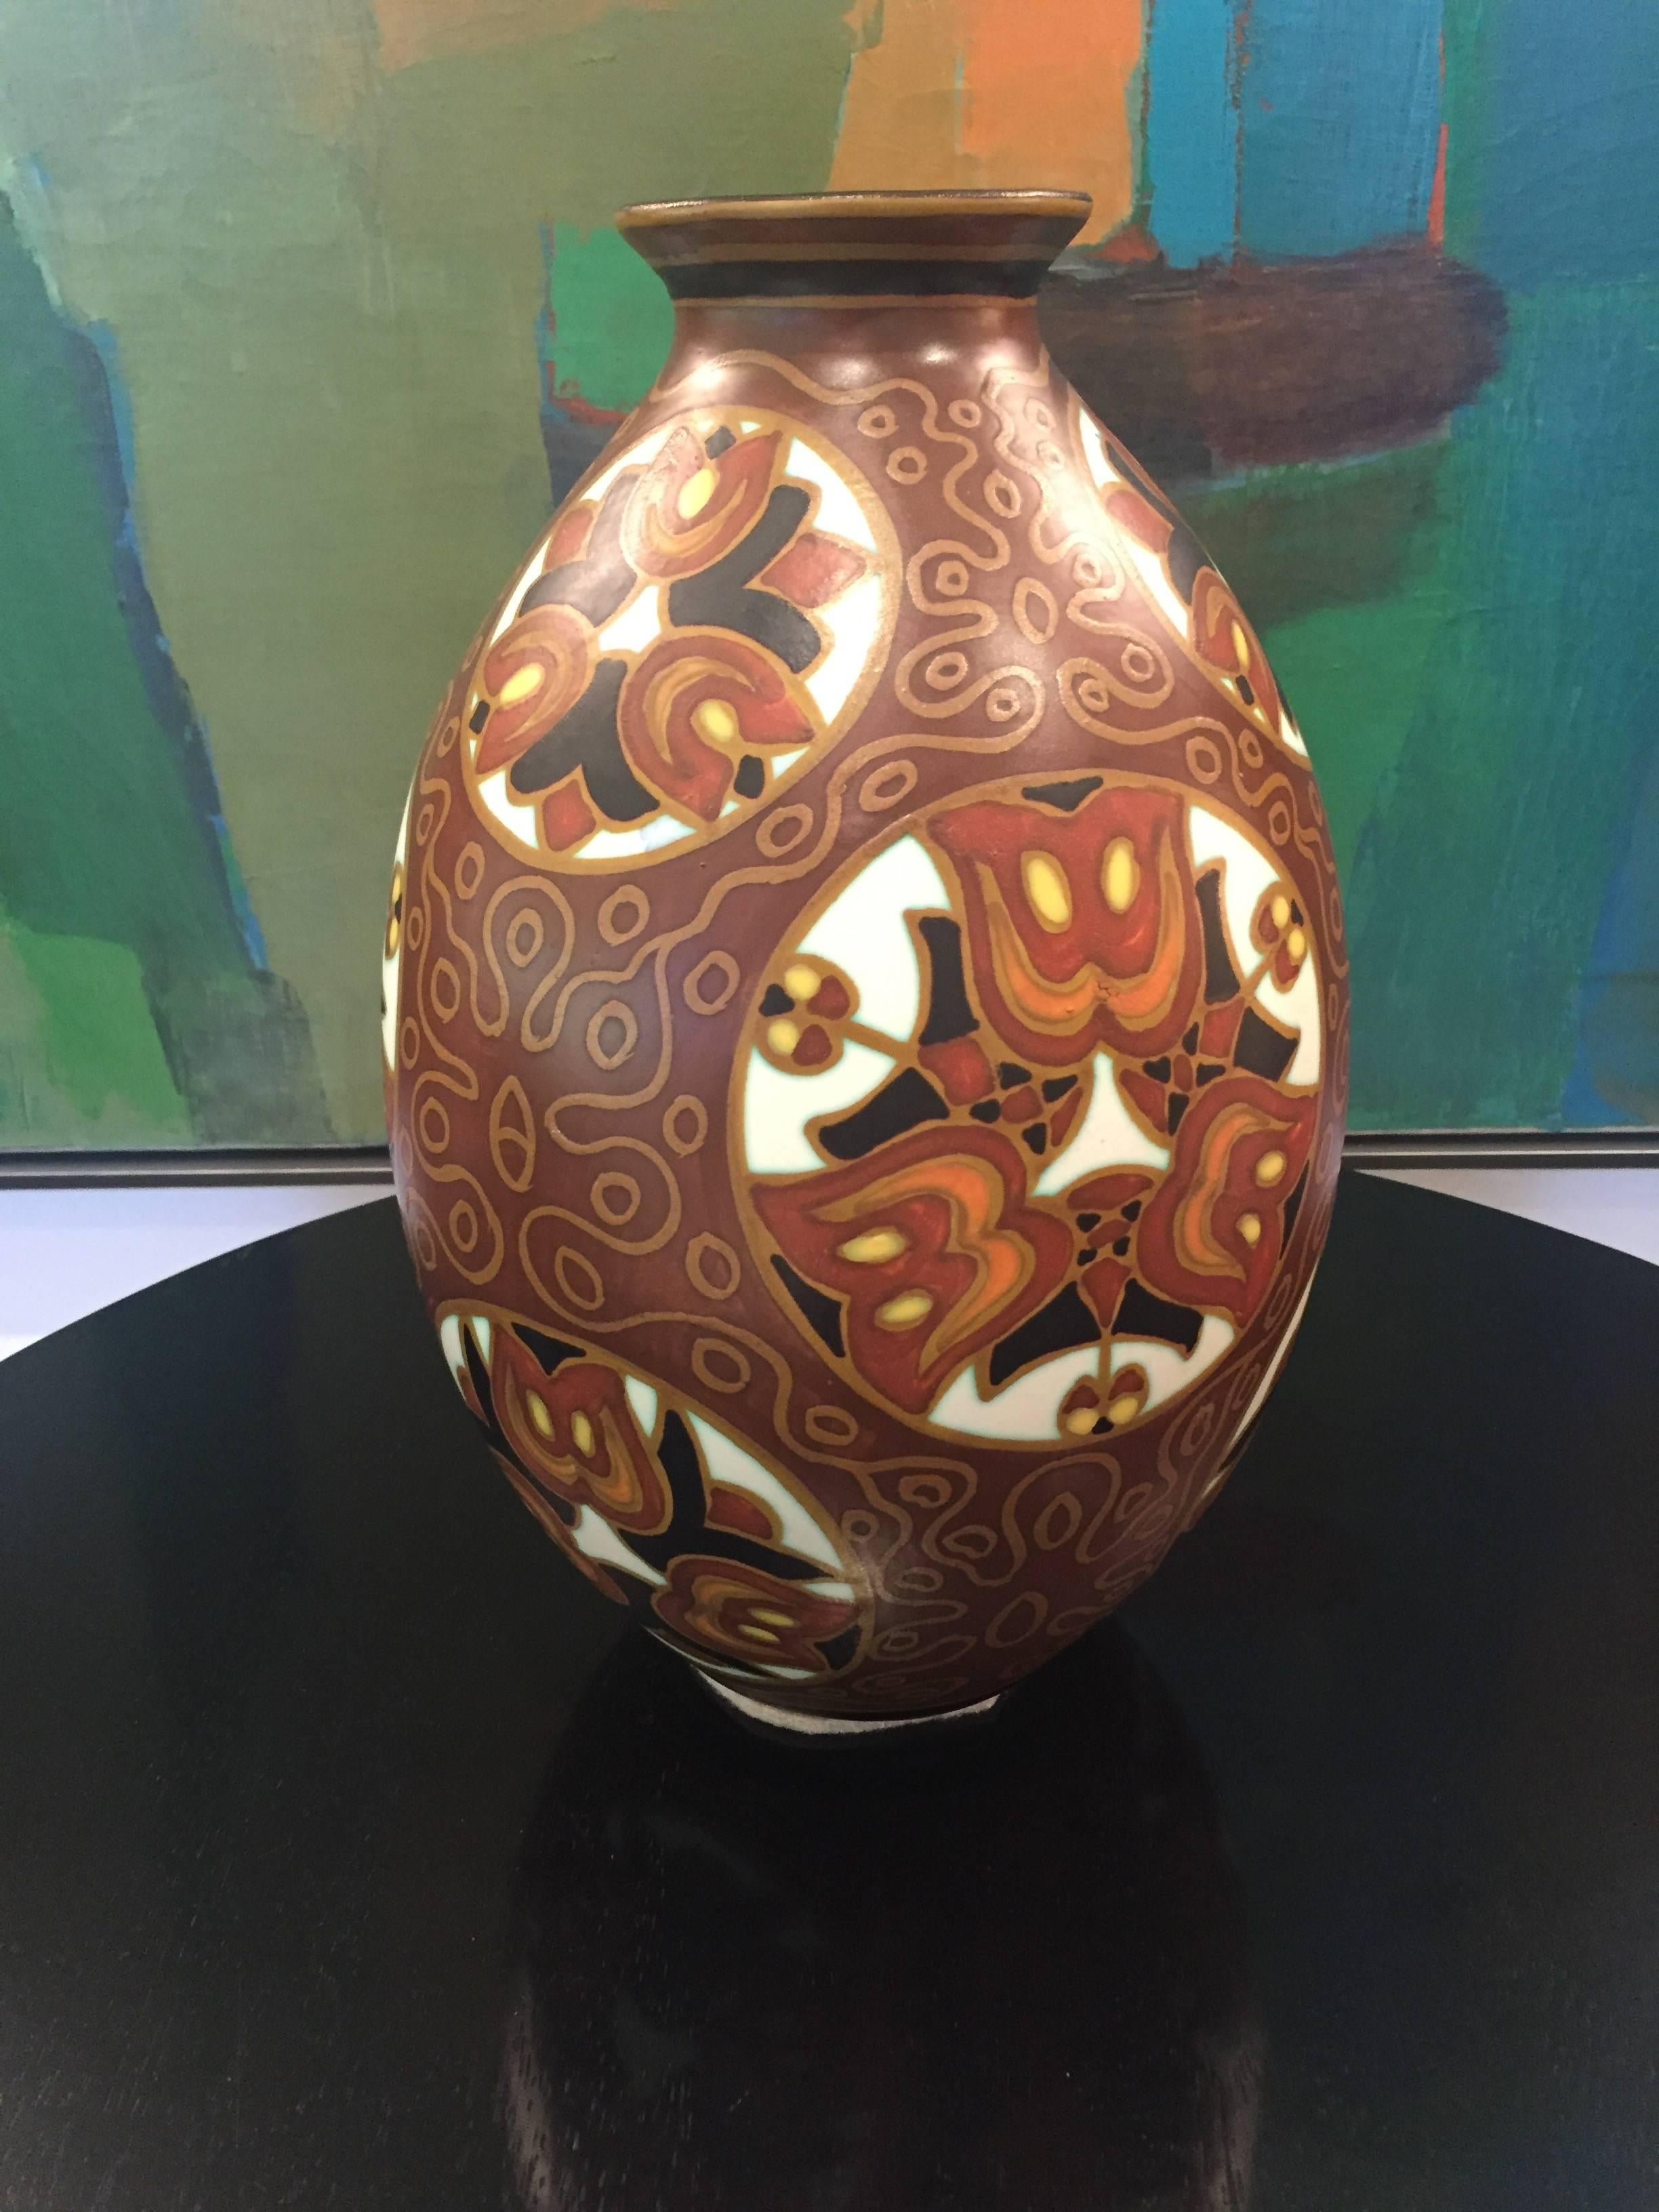 An Art Deco ovoidal vase in polychrome matte enameled earthenware with a black everted neck from the Belgian Boch Frères Keramis Factory. The floral motif in warm shades covering the body features stylized tulips in white roundels. The brown